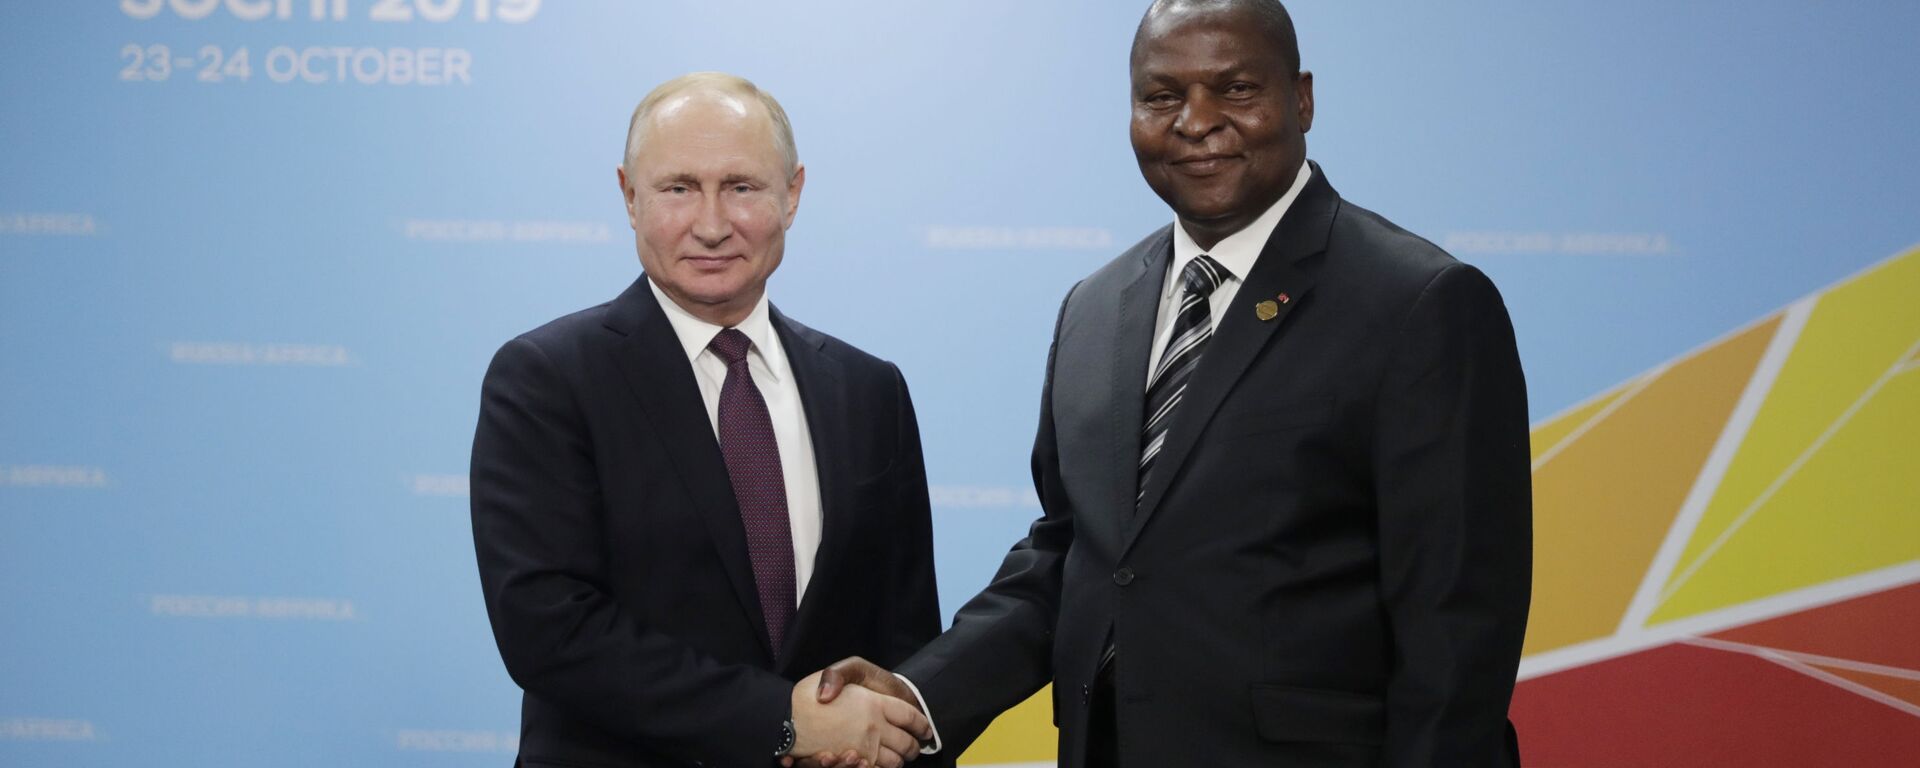 Russian President Vladimir Putin and Central African Republic President Faustin Archange Touadera shake hands as they pose for a photo prior to their meeting at the 2019 Russia-Africa Summit and Economic Forum in Sochi, Russia - Sputnik International, 1920, 25.10.2019